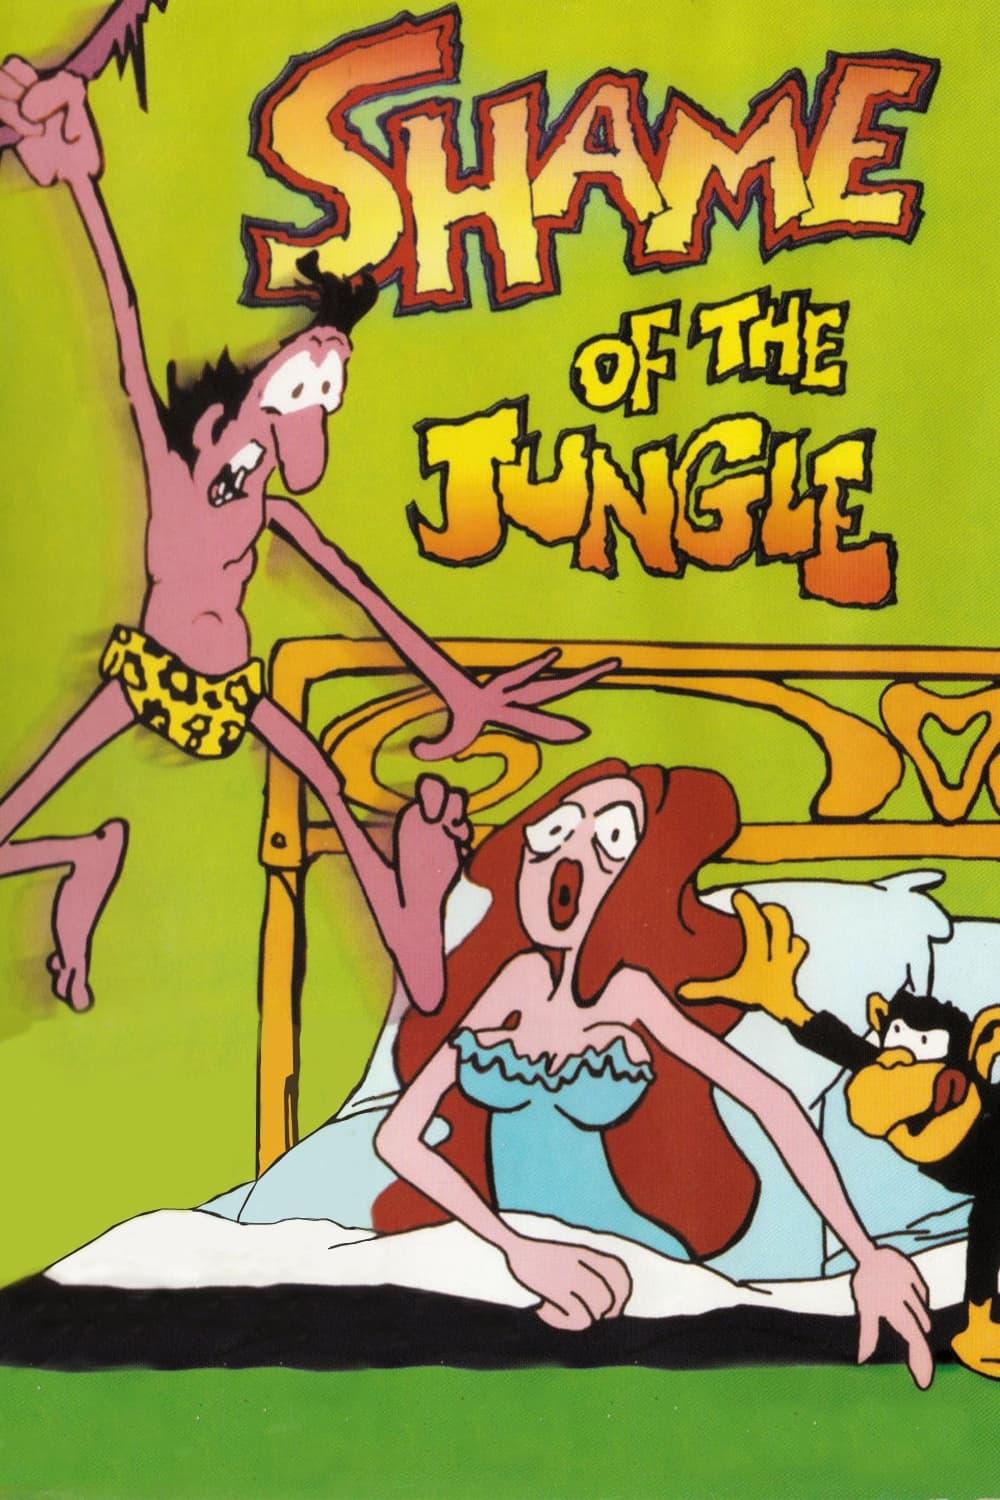 Tarzoon: Shame of the Jungle! poster